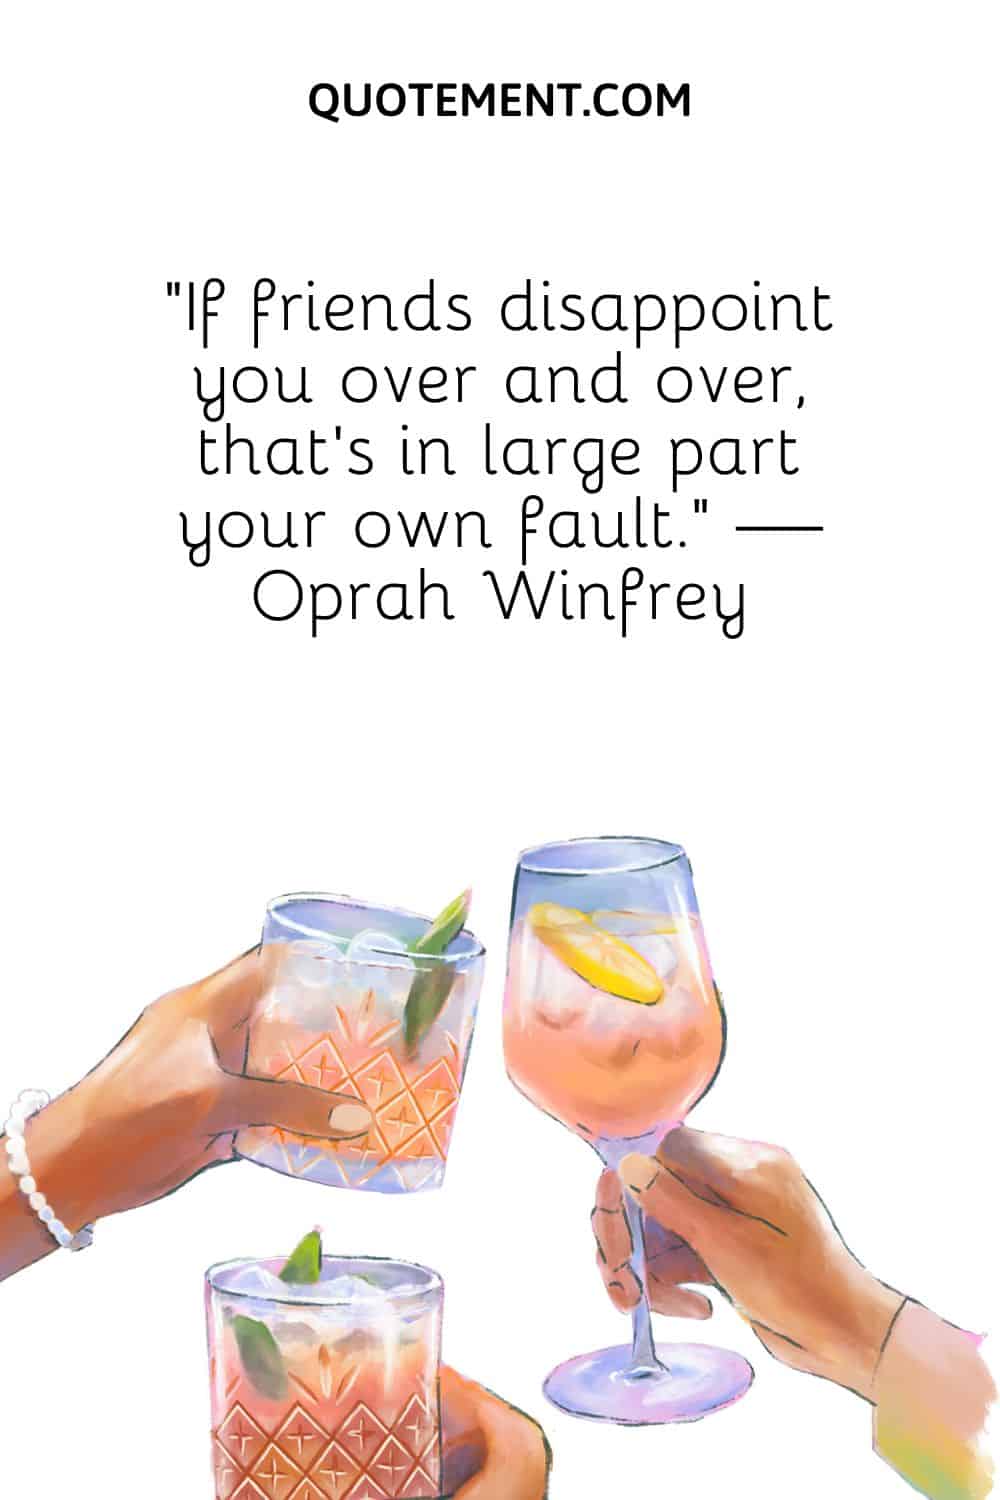 “If friends disappoint you over and over, that's in large part your own fault. — Oprah Winfrey